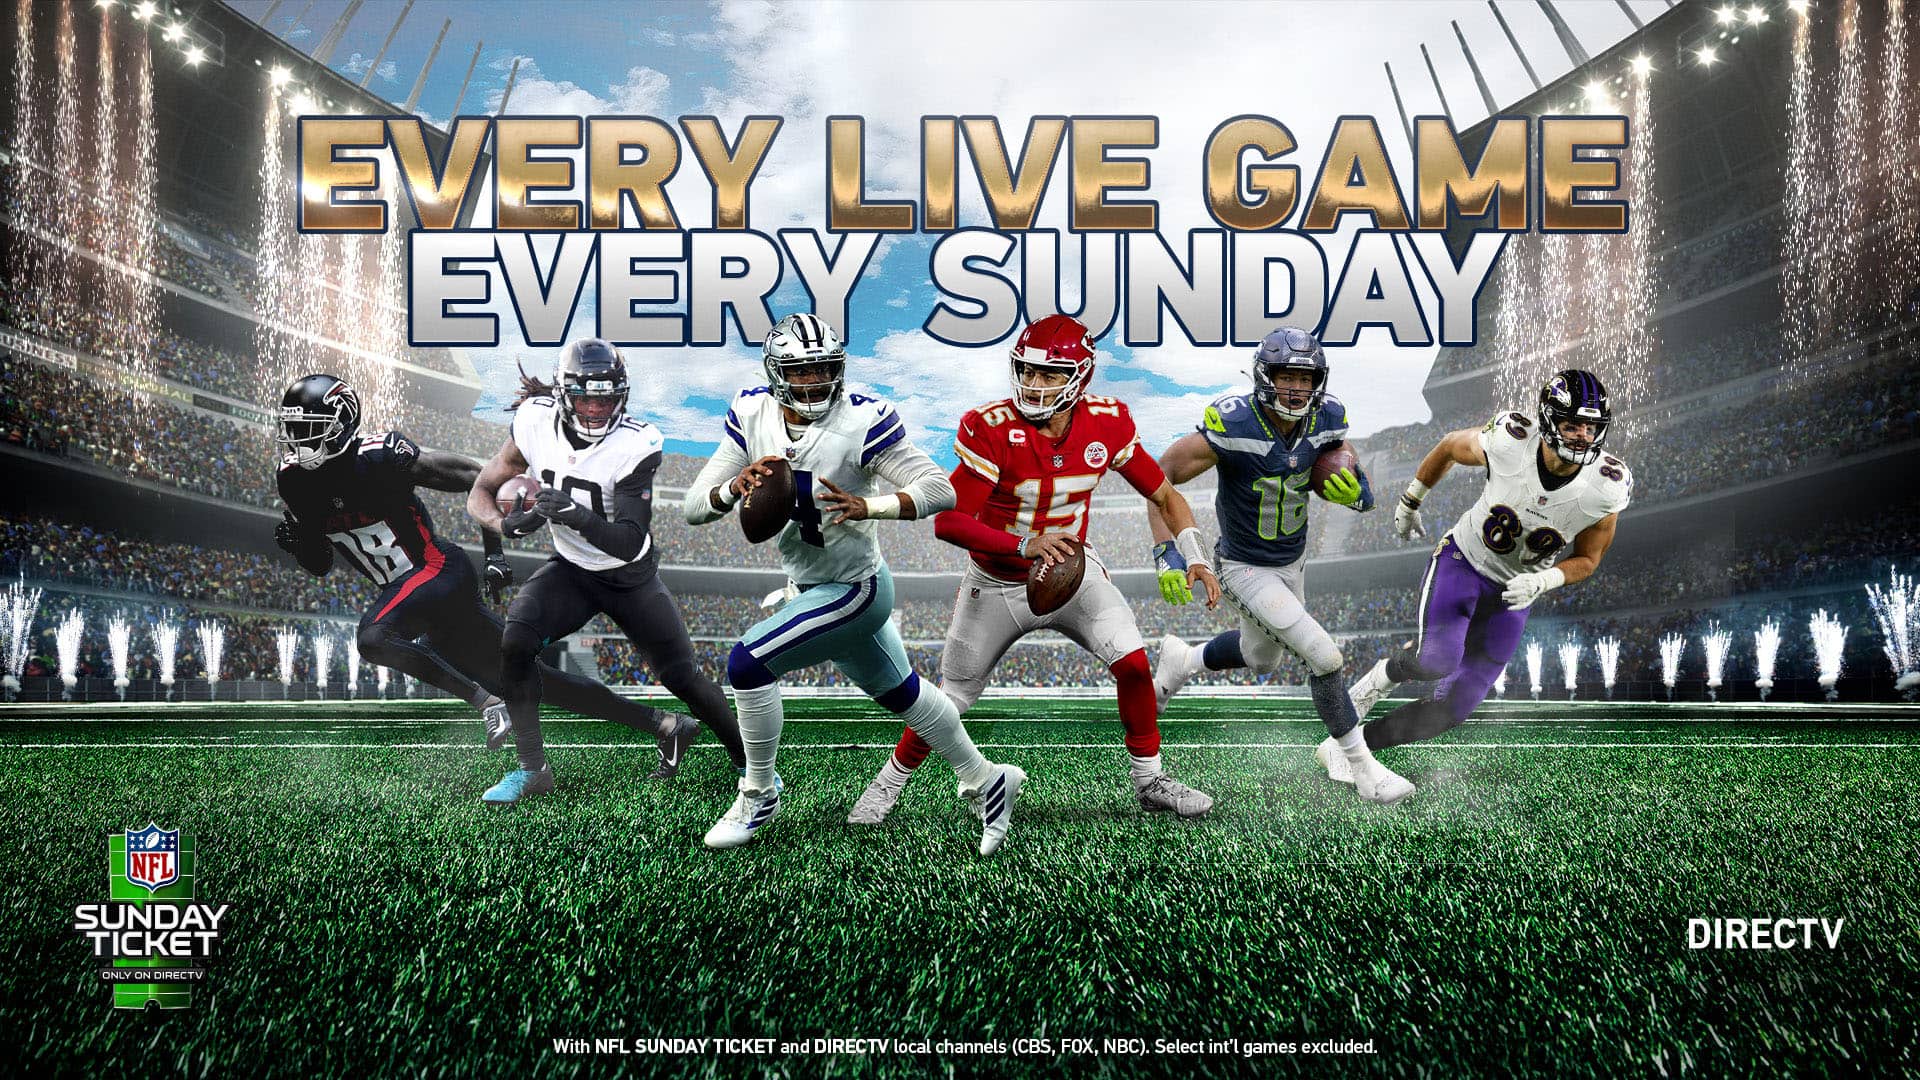 How to Enjoy NFL: Get a Deal on NFL SUNDAY TICKET